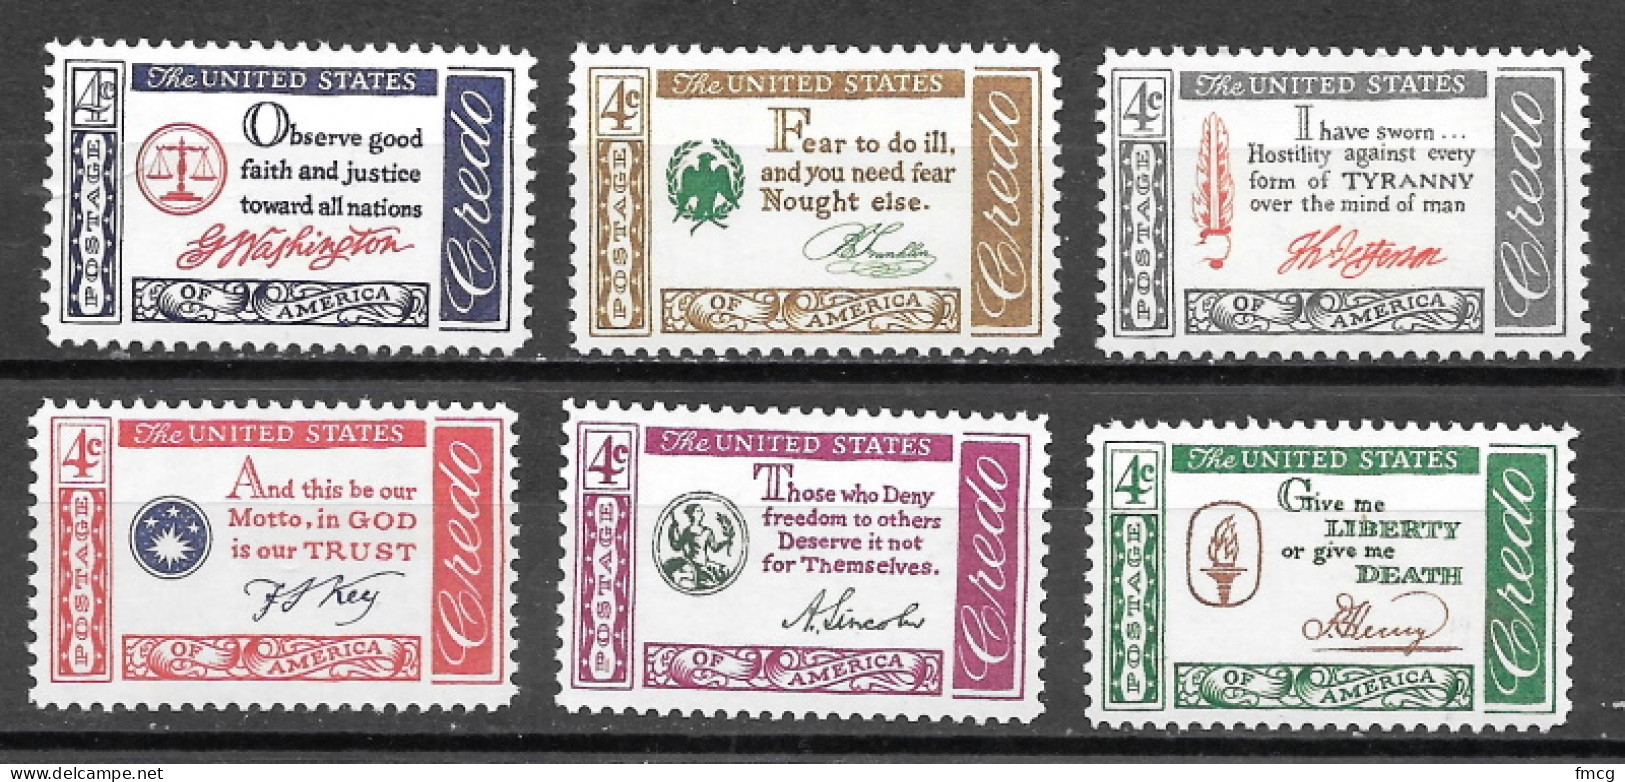 1960-1 American Credo Series - 6 Stamps, Mint Never Hinged - Nuevos